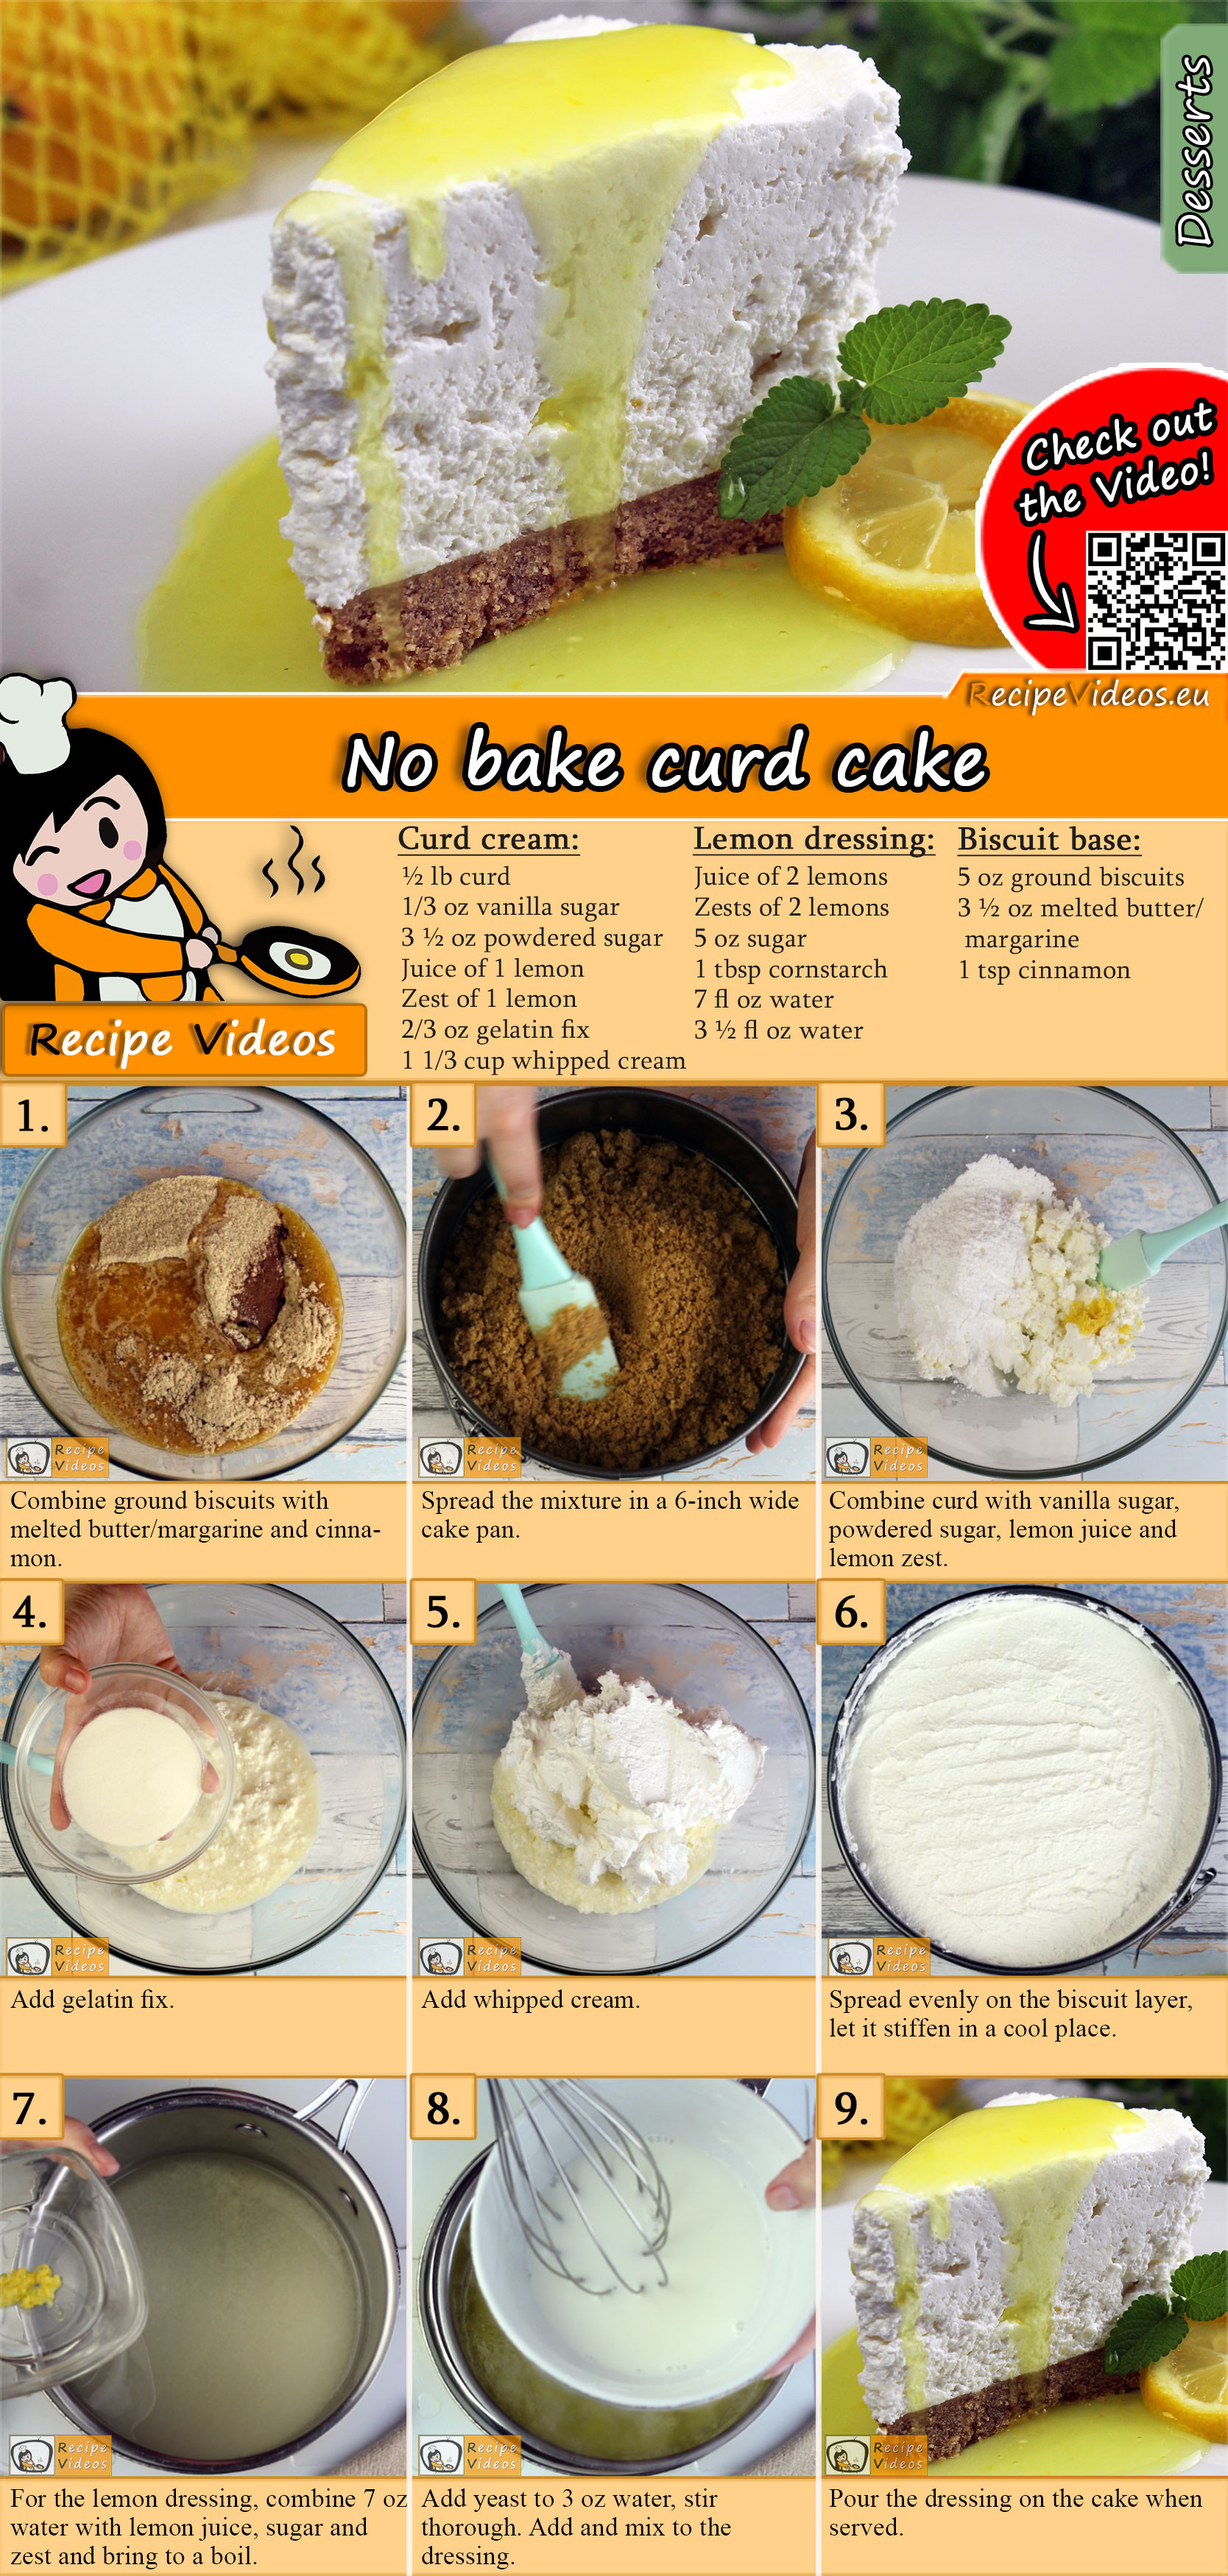 No bake curd cake recipe with video